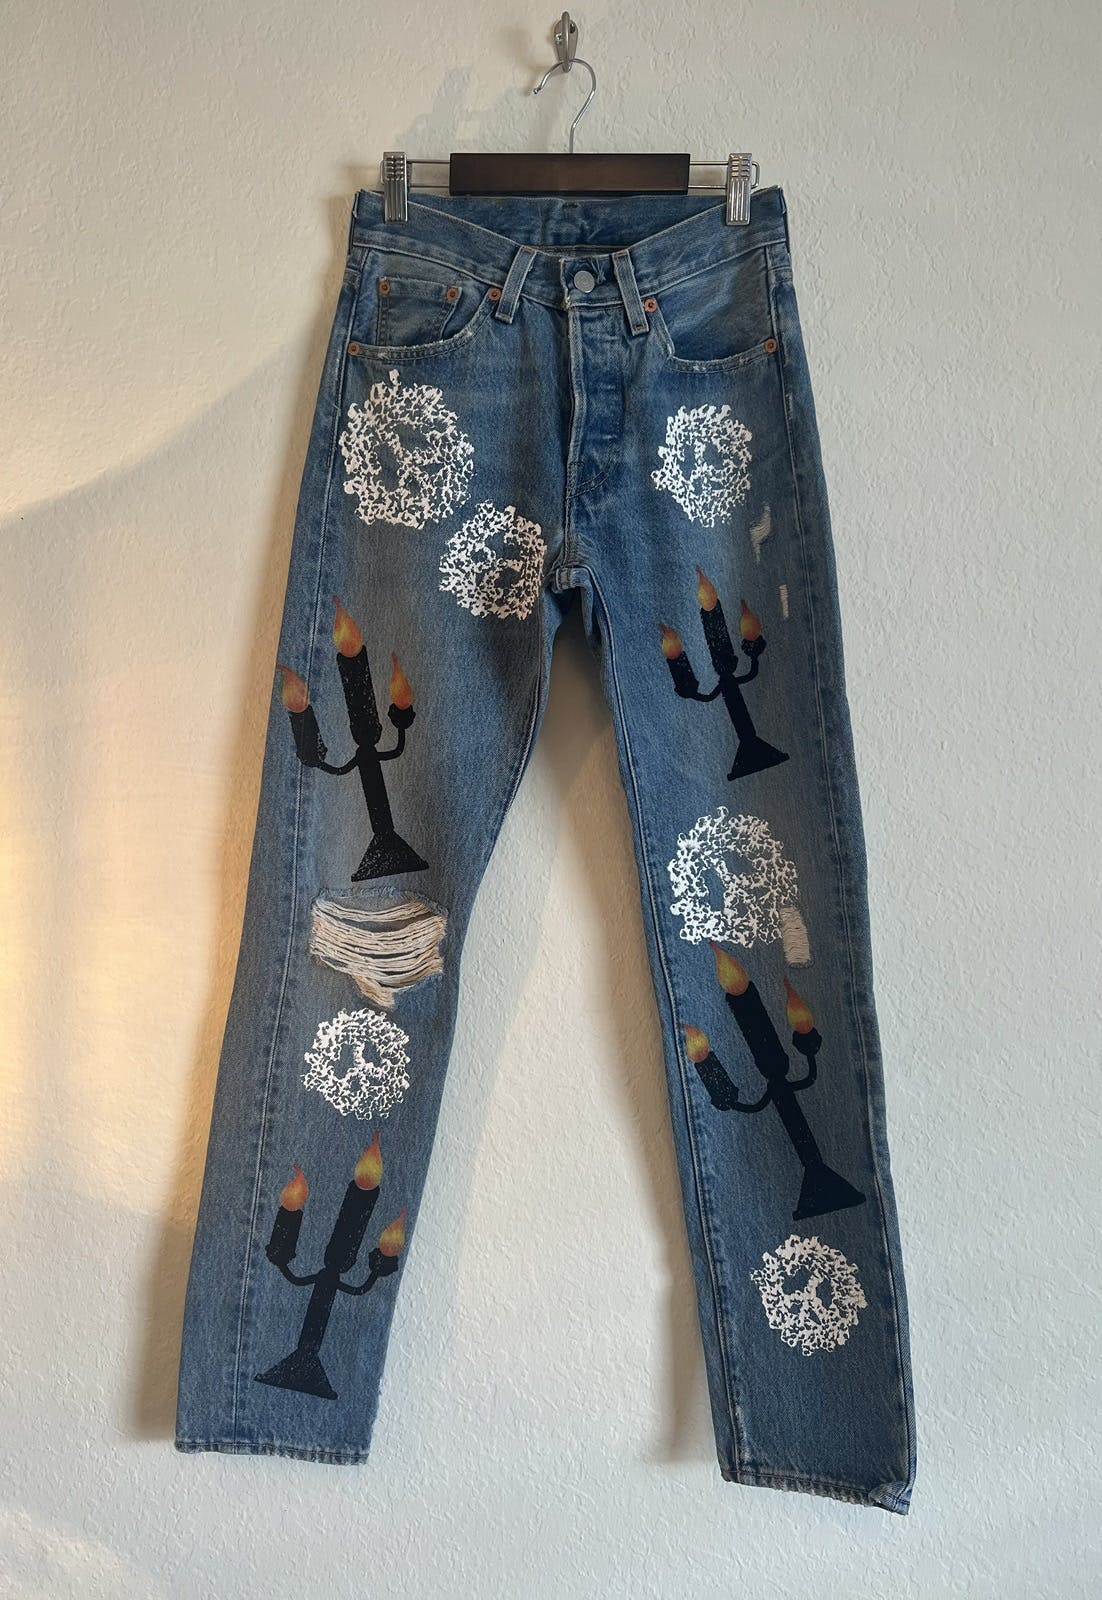 Denim Tears x Virgil Abloh Message in a Tear Embroidered Jeans